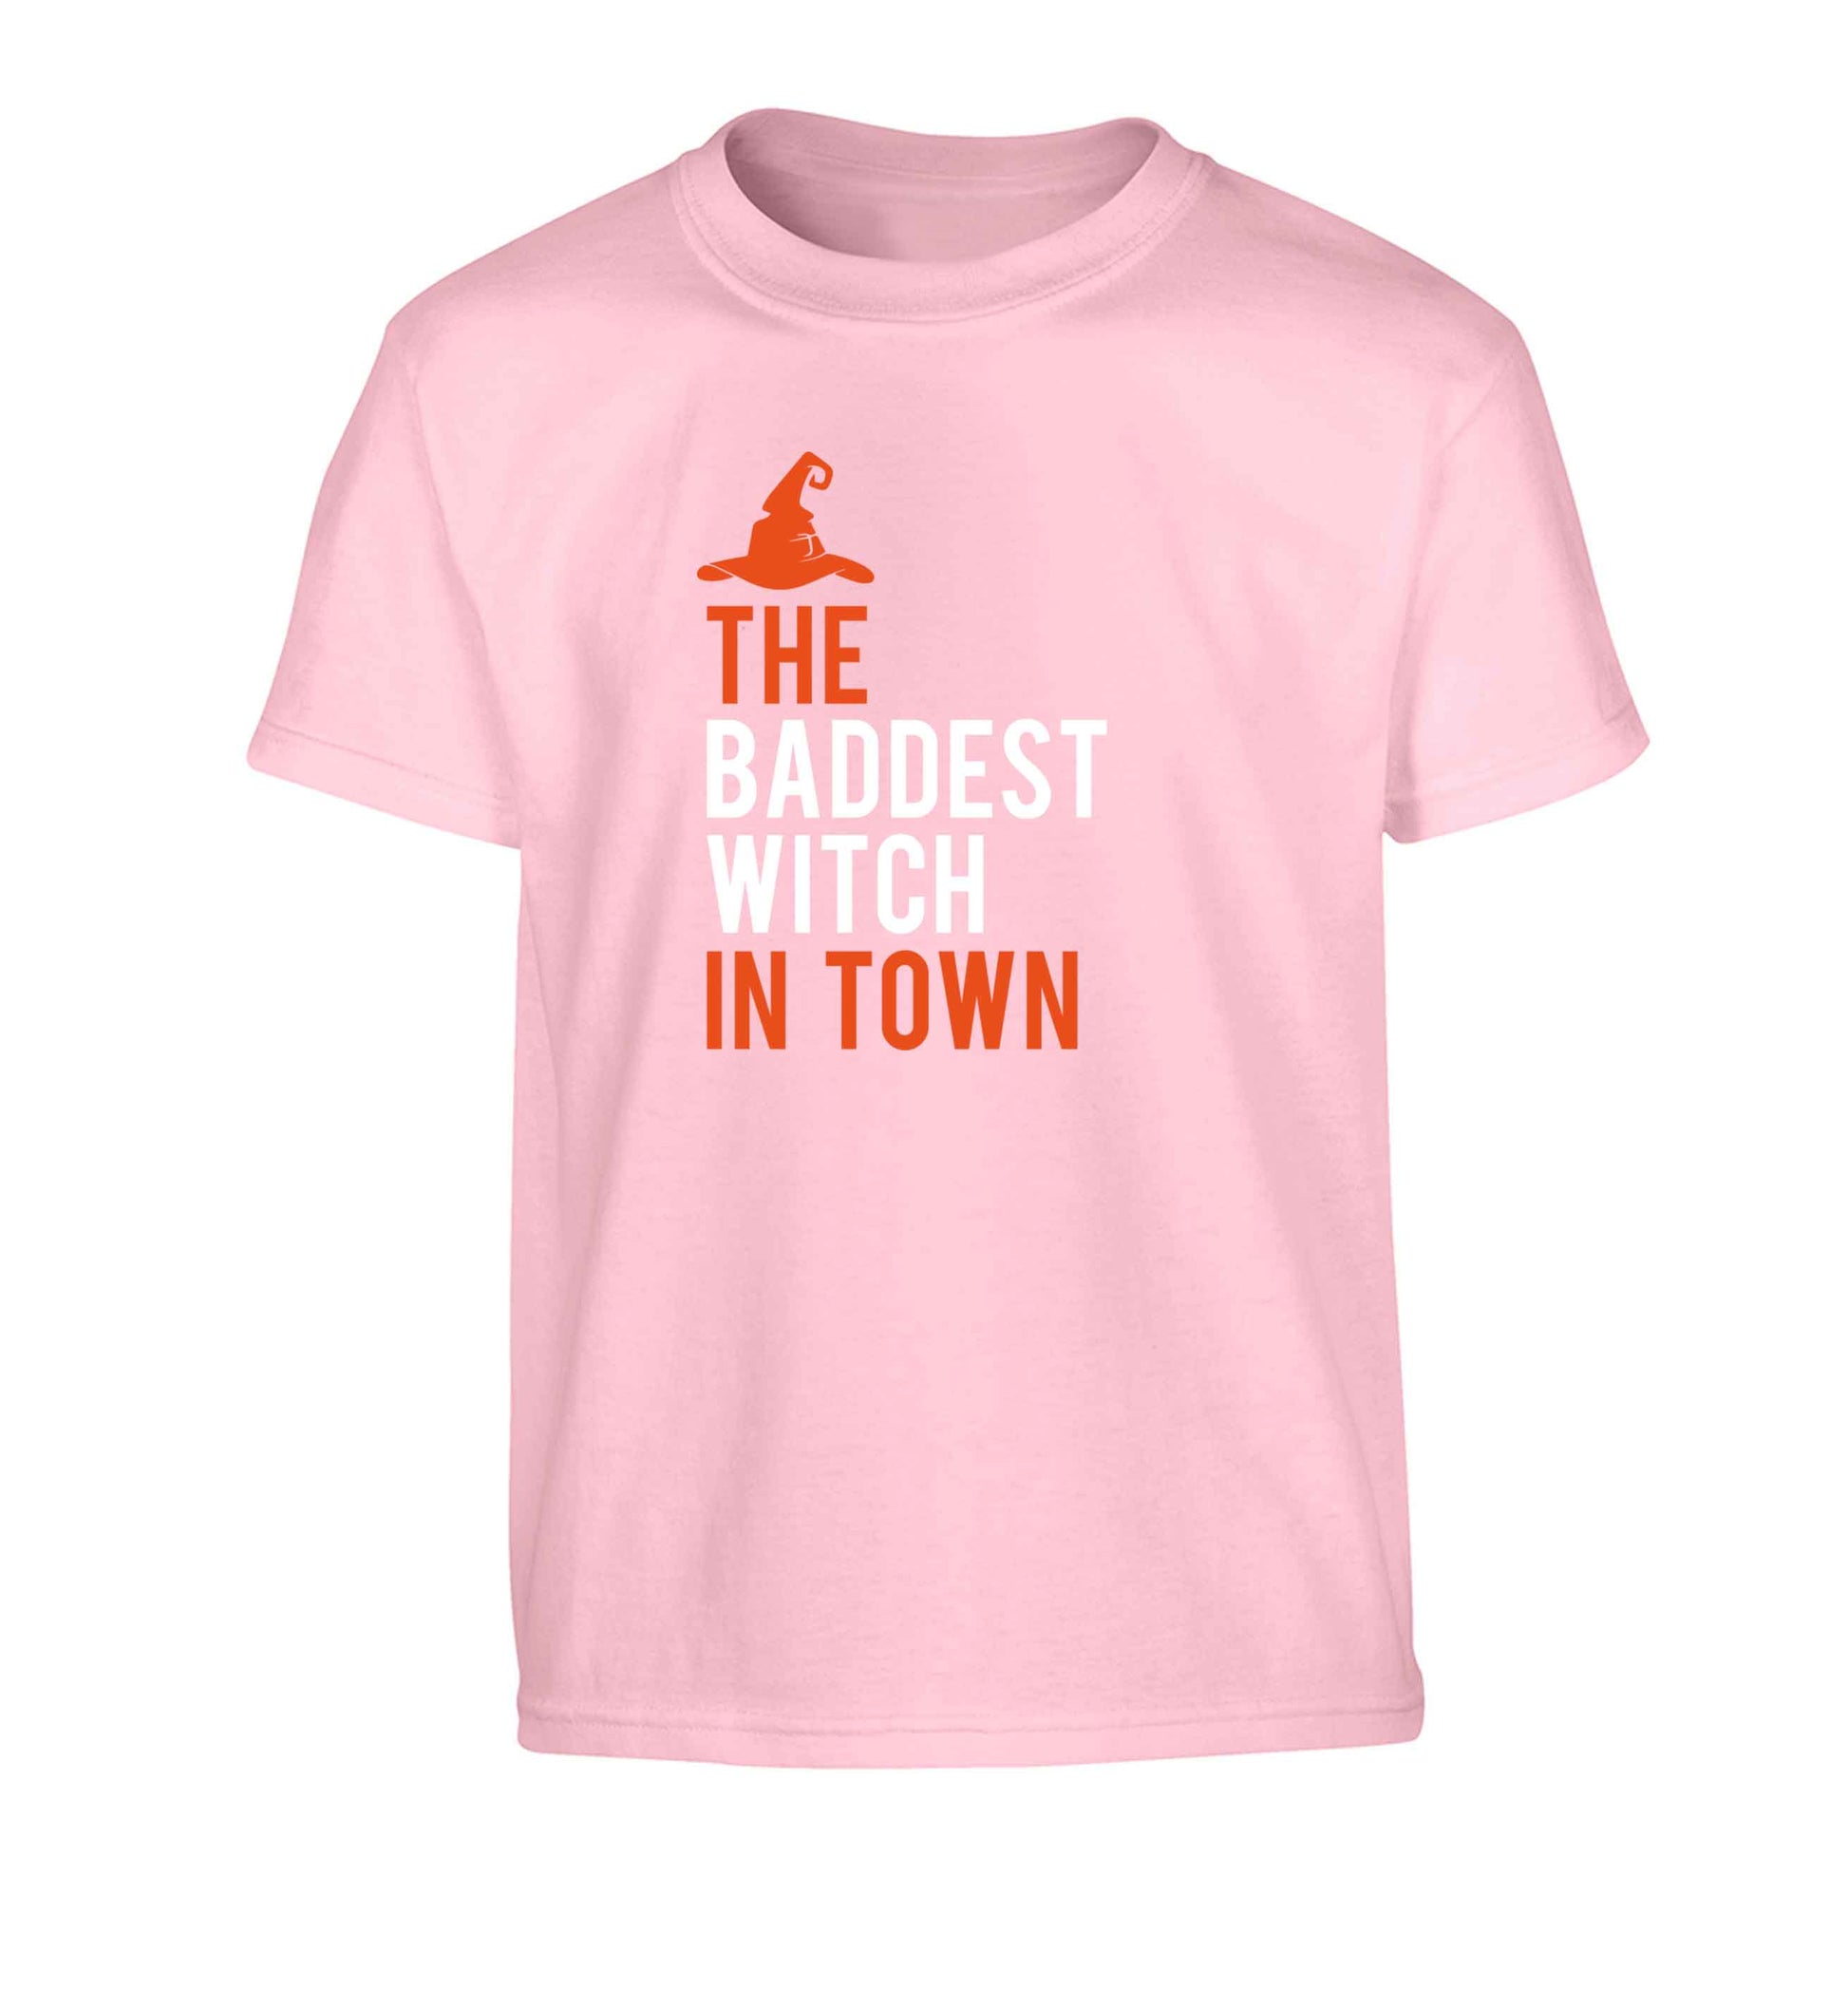 Badest witch in town Children's light pink Tshirt 12-13 Years